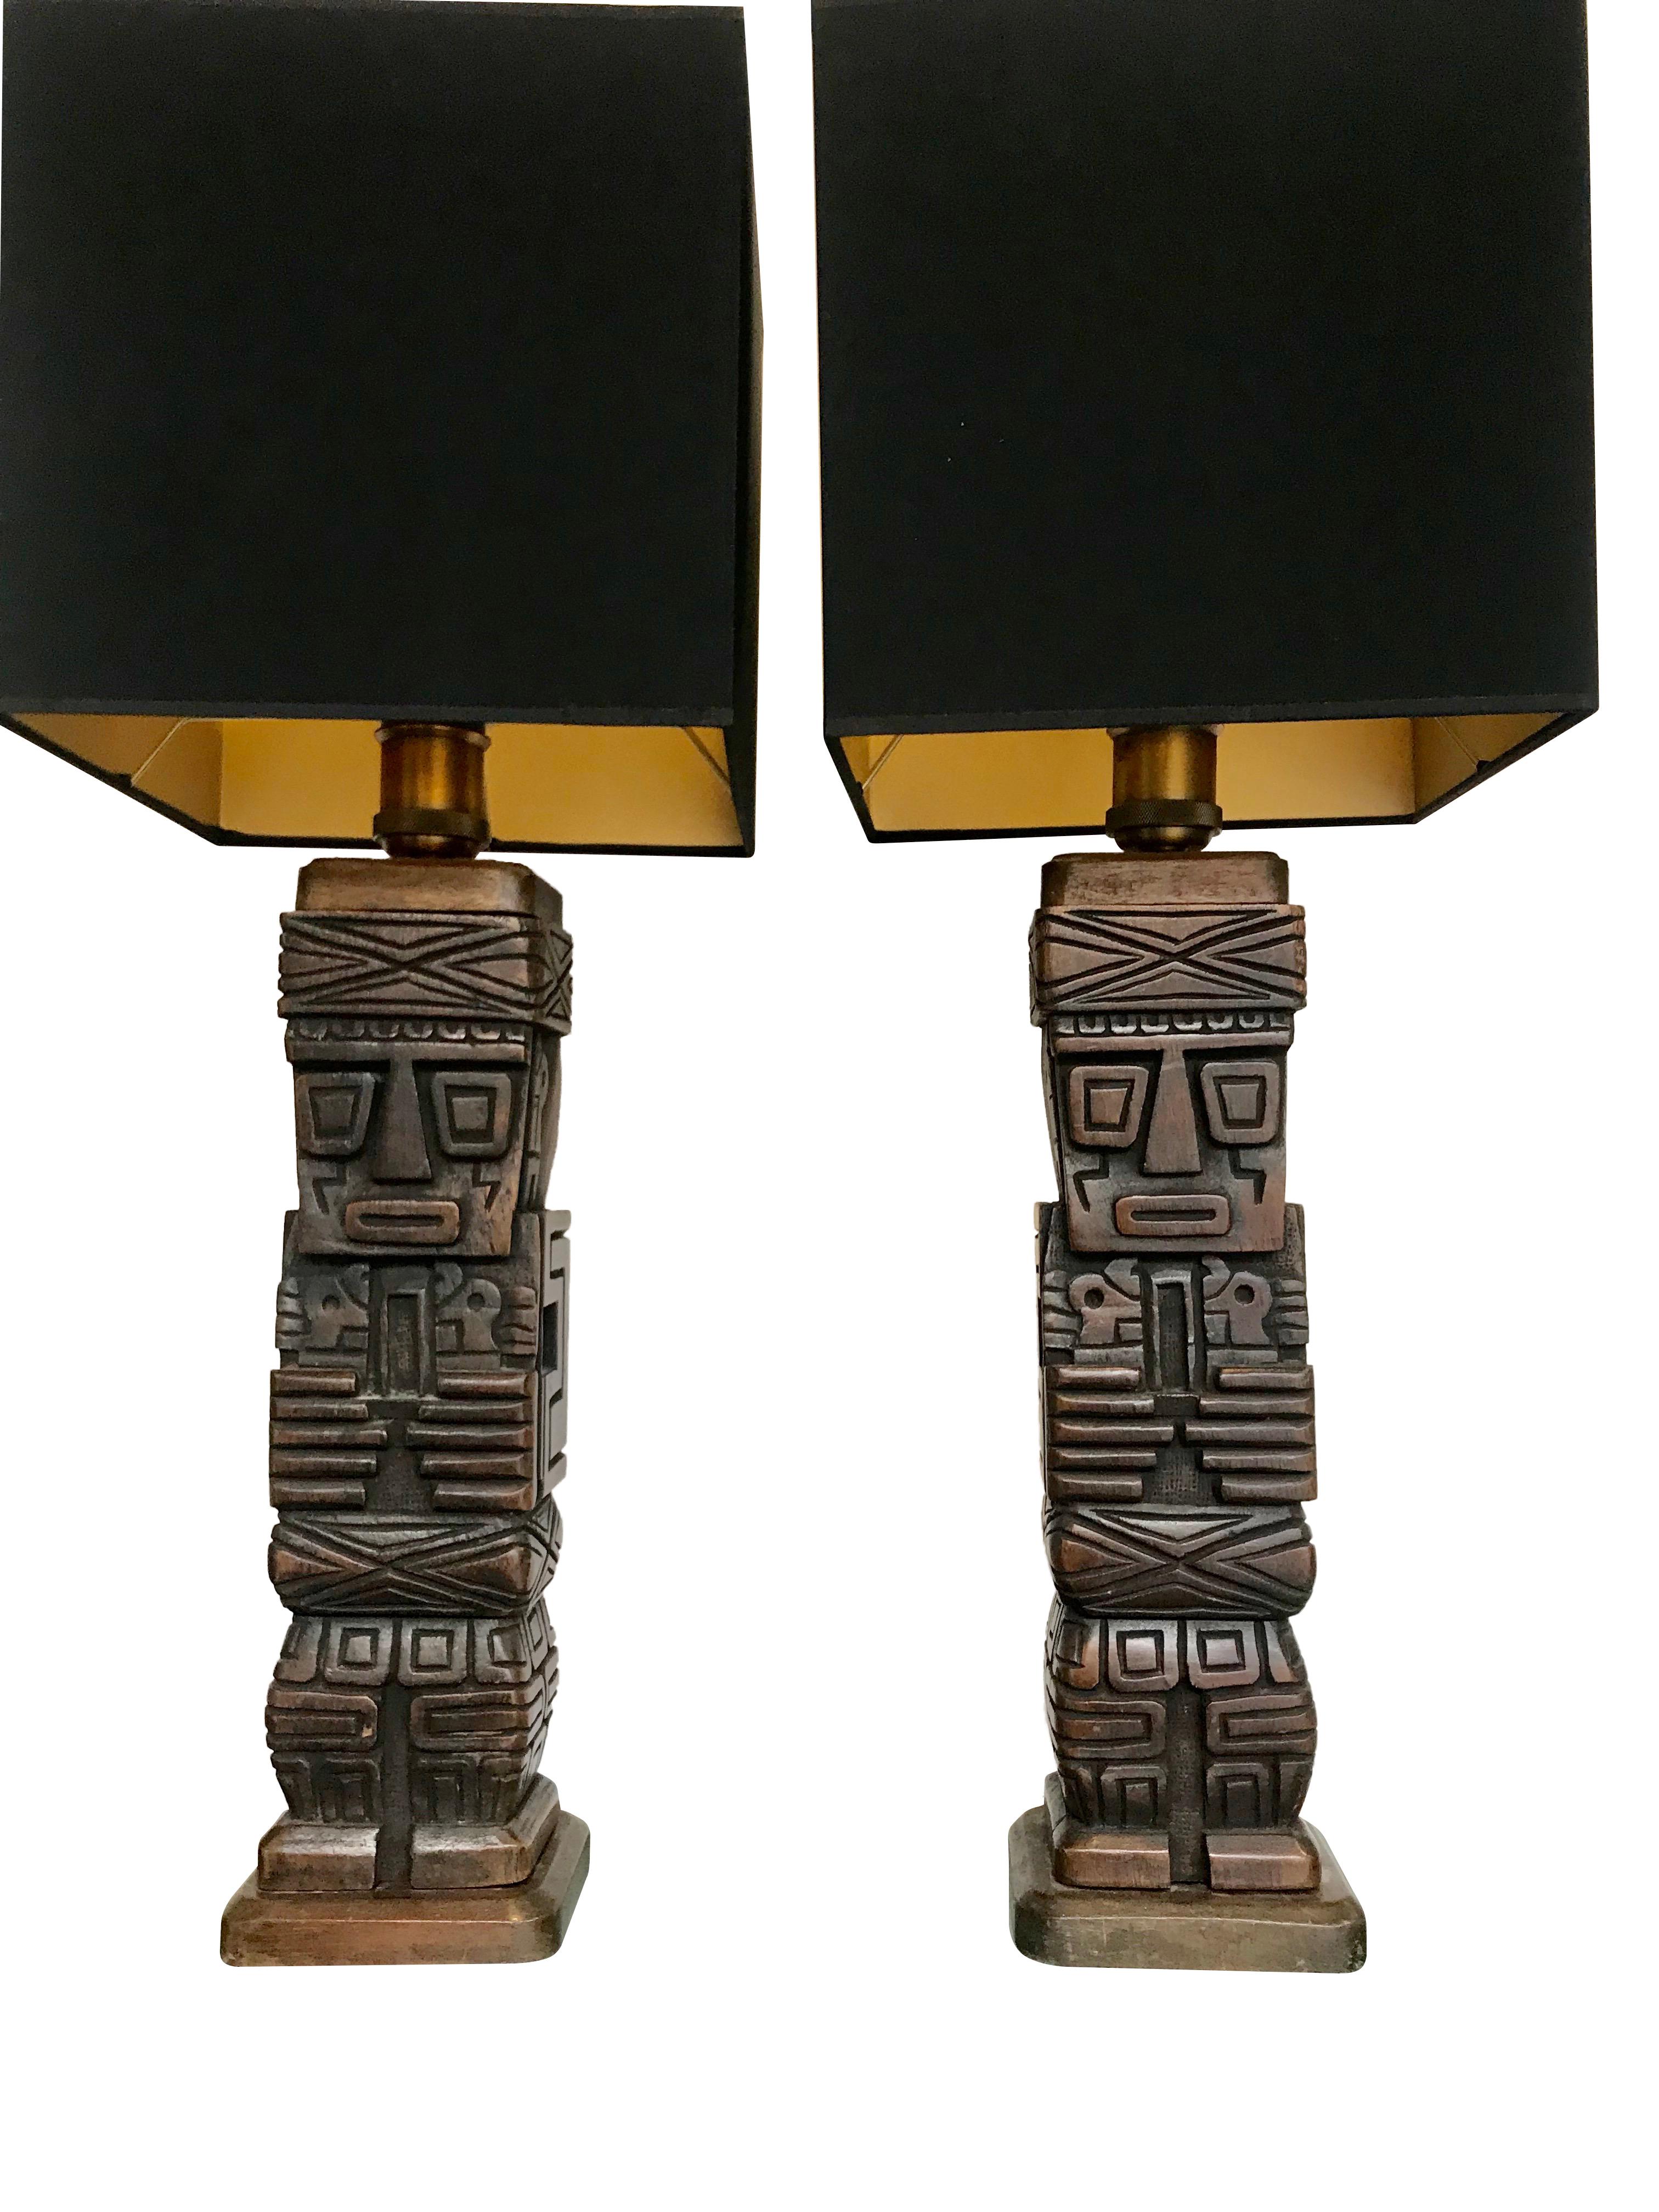 A pair of carved wooden Tiki lamps with brass fittings. Available with new bespoke in either black or Ivory with gold linings.